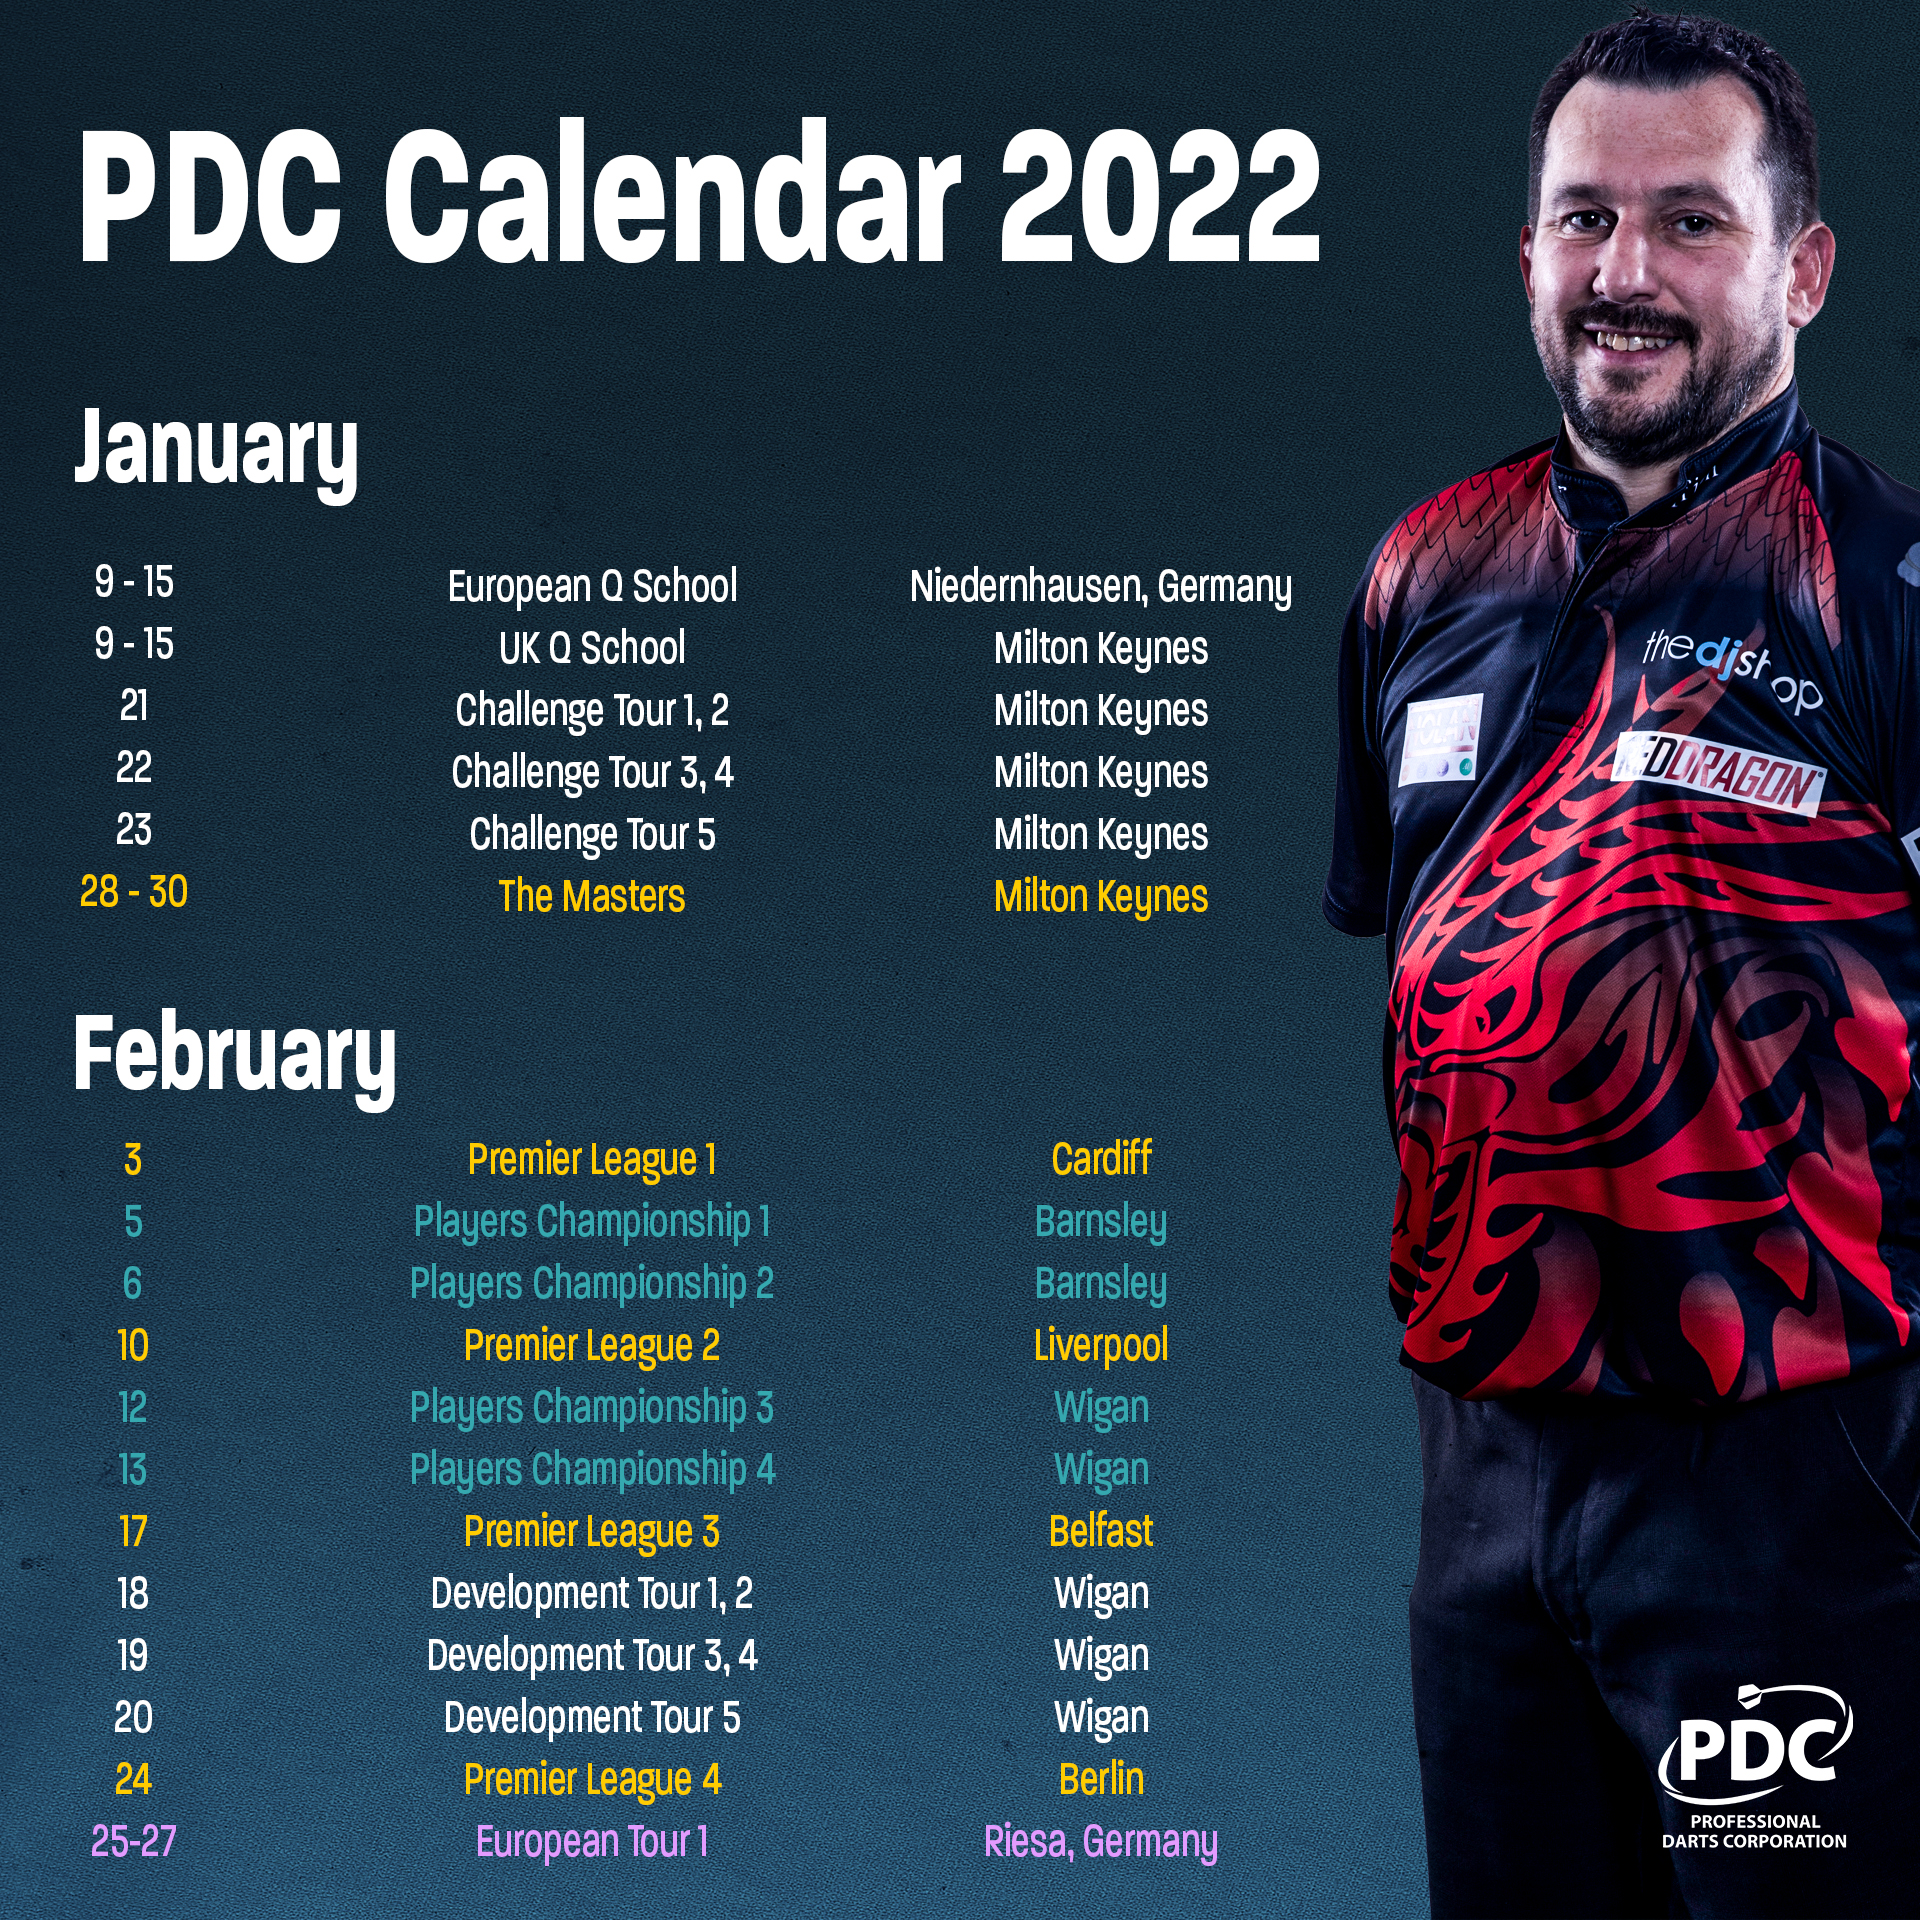 Masters Schedule 2022 2022 Pdc Calendar Confirmed Up To End Of October | Pdc